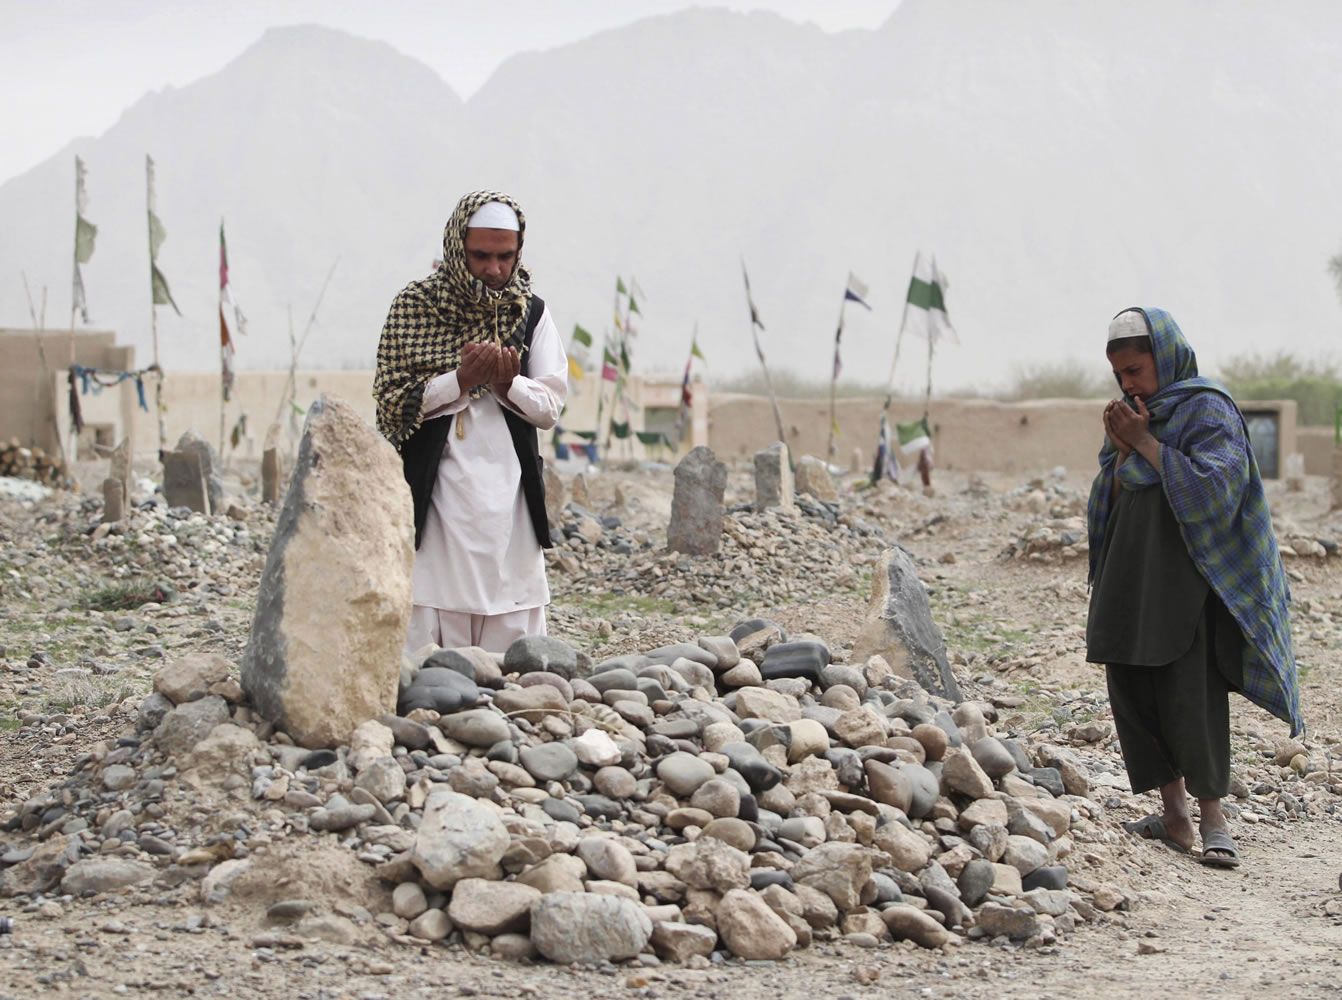 Afghan villagers pray Saturday at the grave of one of the victims killed in the March 11 shooting rampage in the Panjwai district of Kandahar province.